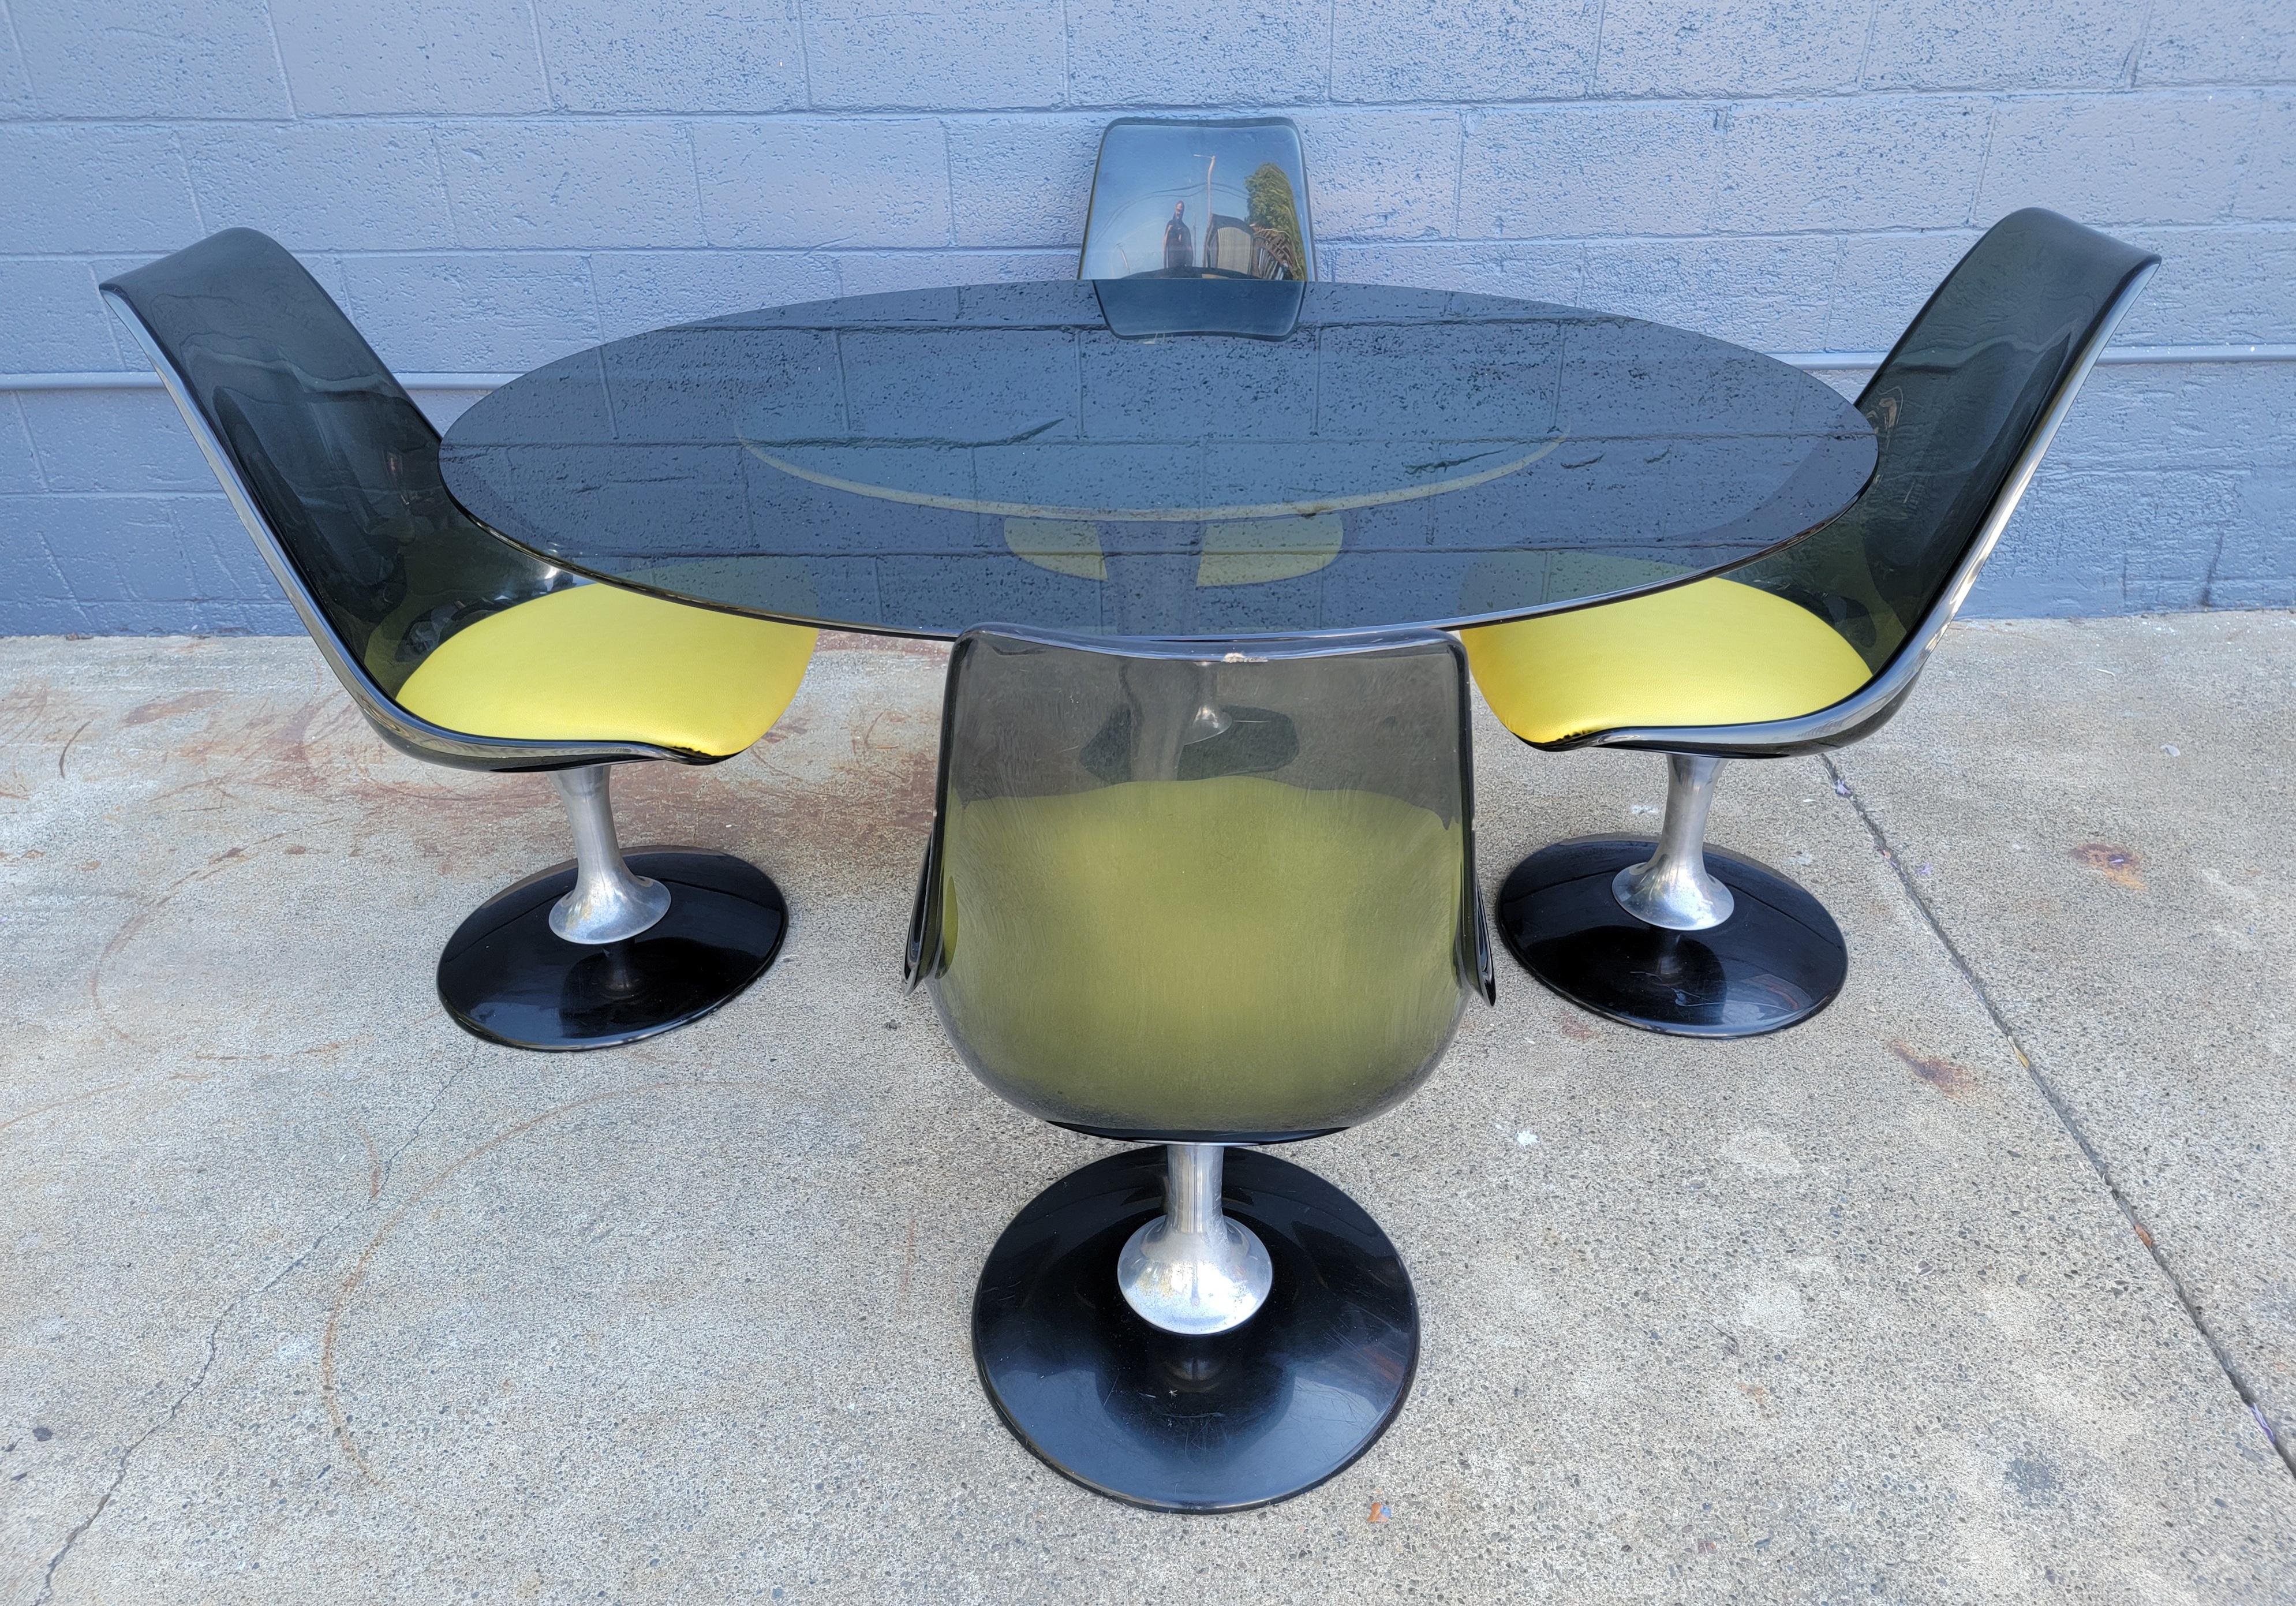 A 5 piece dining or dinette set by Chromcraft, circa. 1970. Set of 4 tulip Base swivel chairs made of aluminum and smokey acrylic. Oval smokey glass table top. Retains 